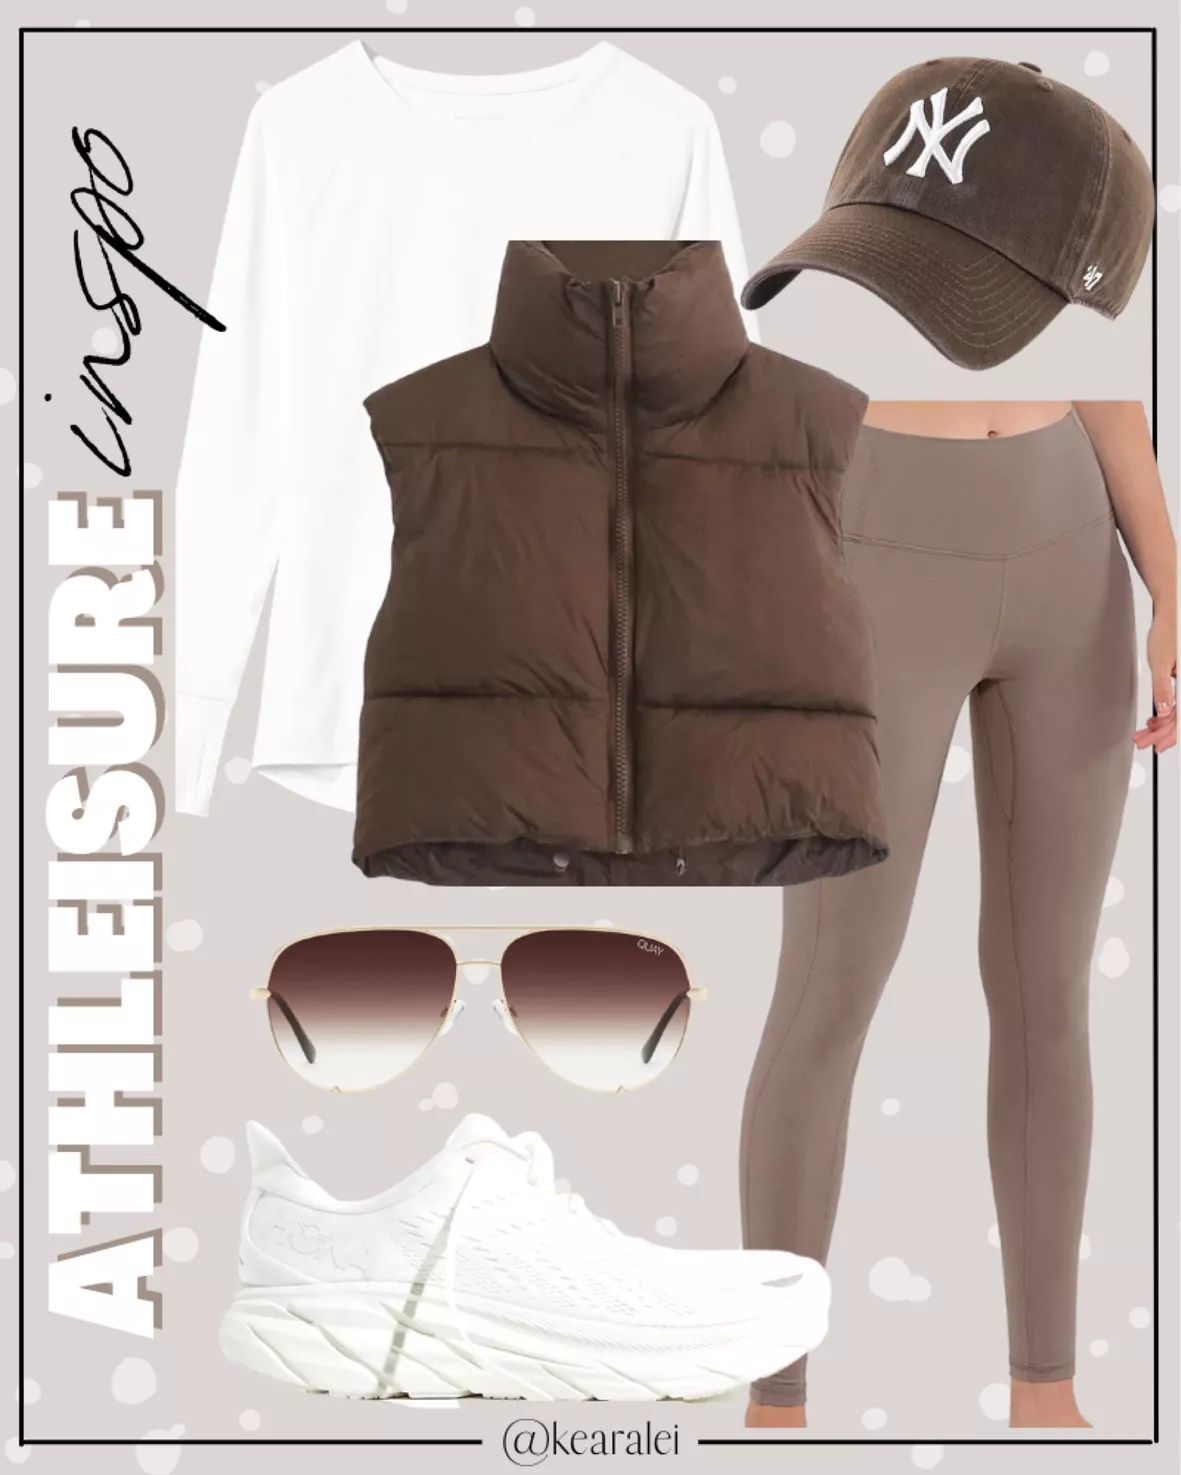 Legging sneakers winter outfit with cap and coat